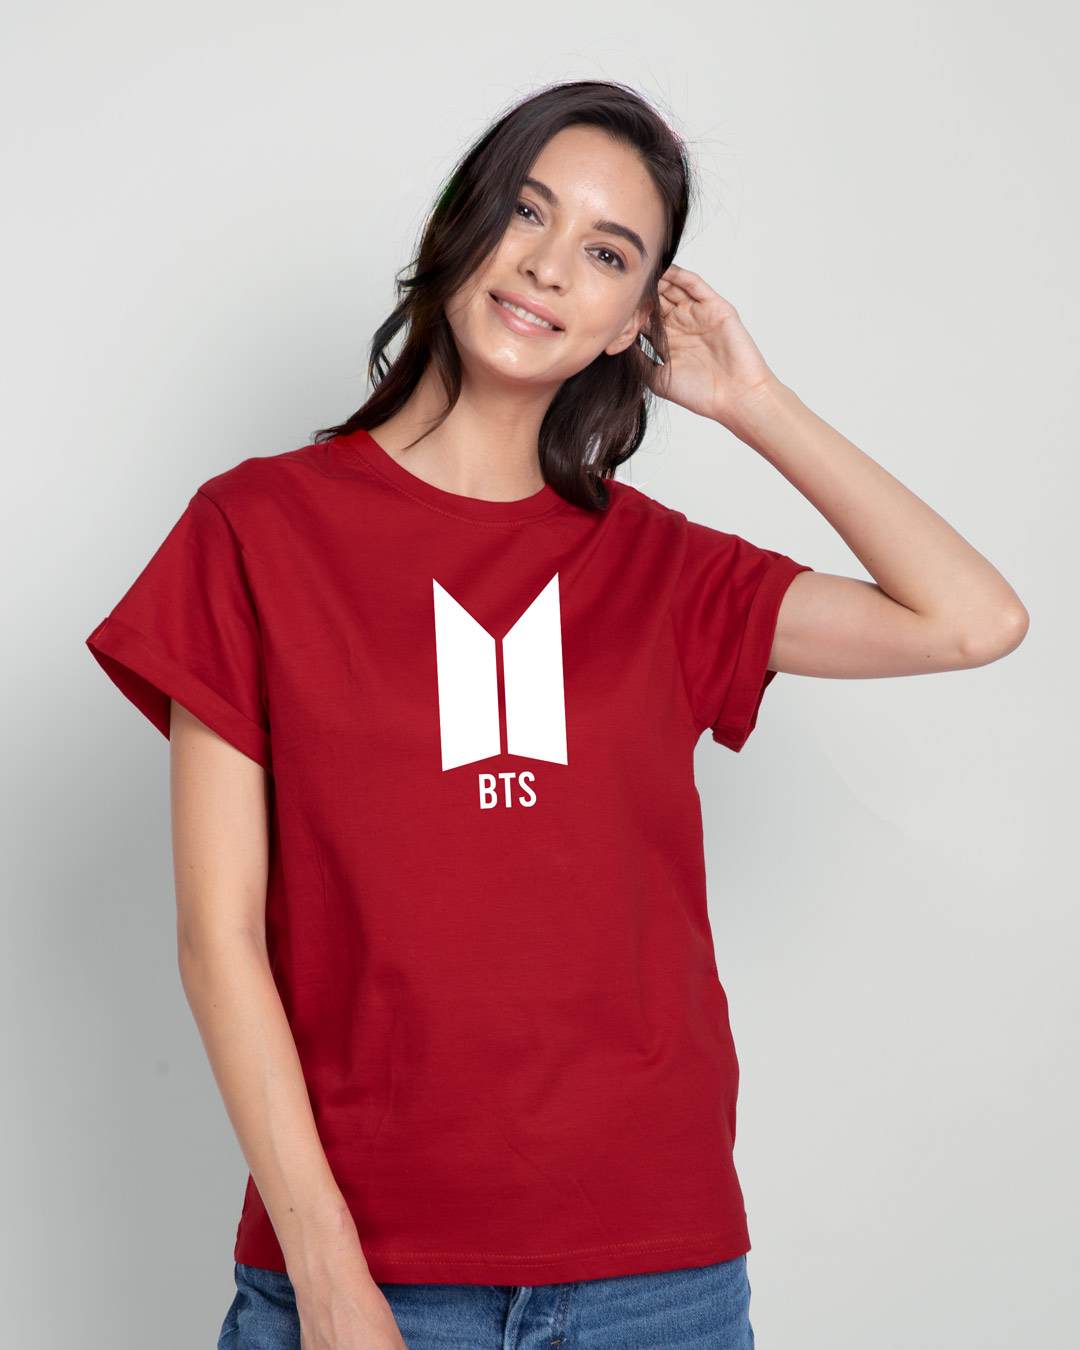 bts t shirt in india